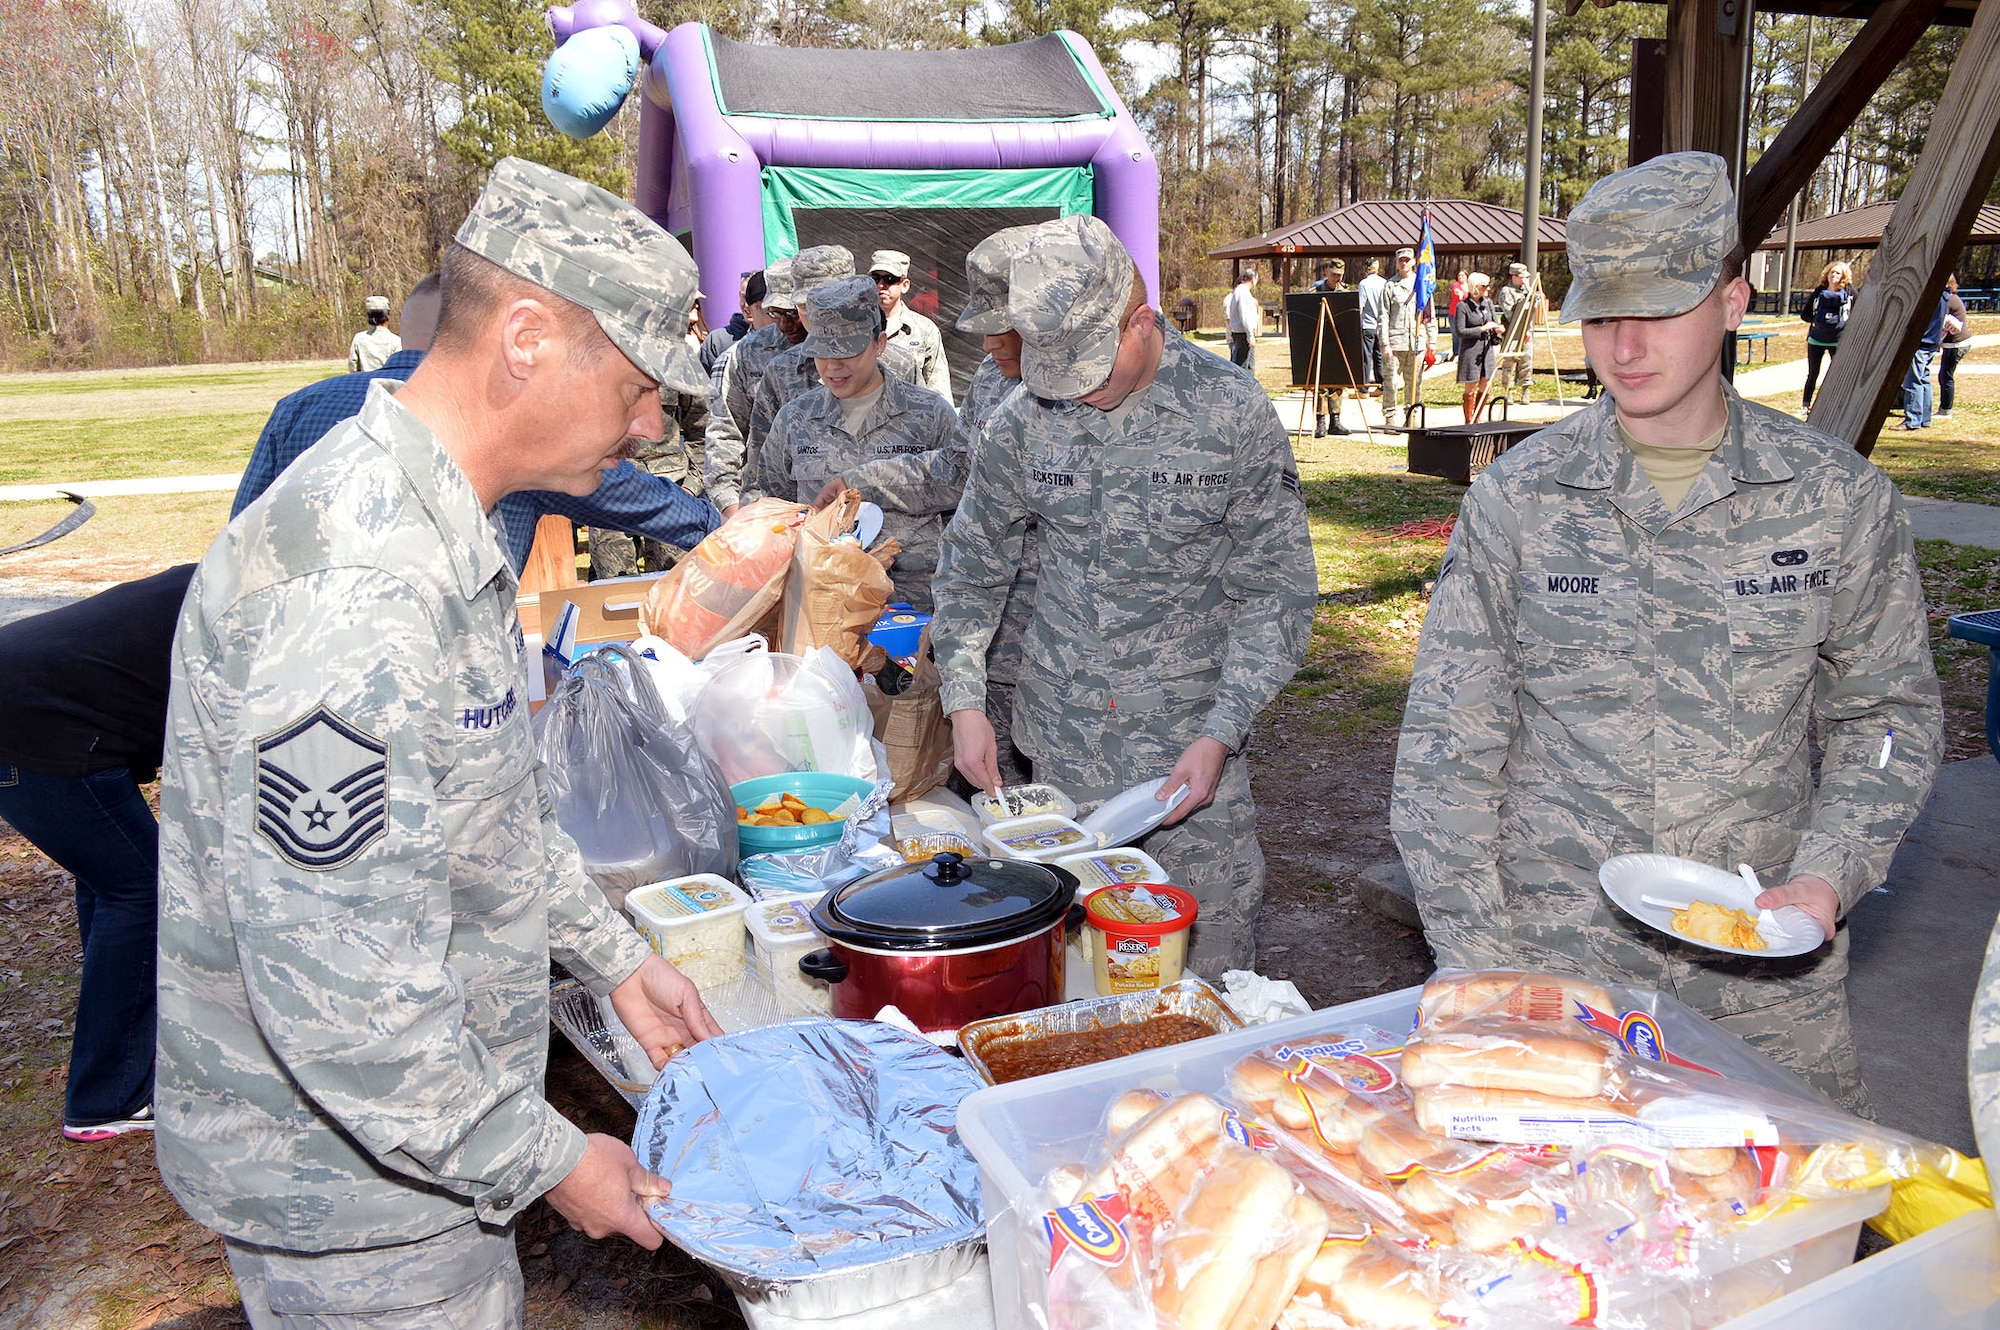 3rd Aerial Port Squadron Airmen and family members go through the food line during a picnic March 29 celebrating the squadron's 60th Anniversary at Pope Army Airfield, Fort Bragg, N.C.
